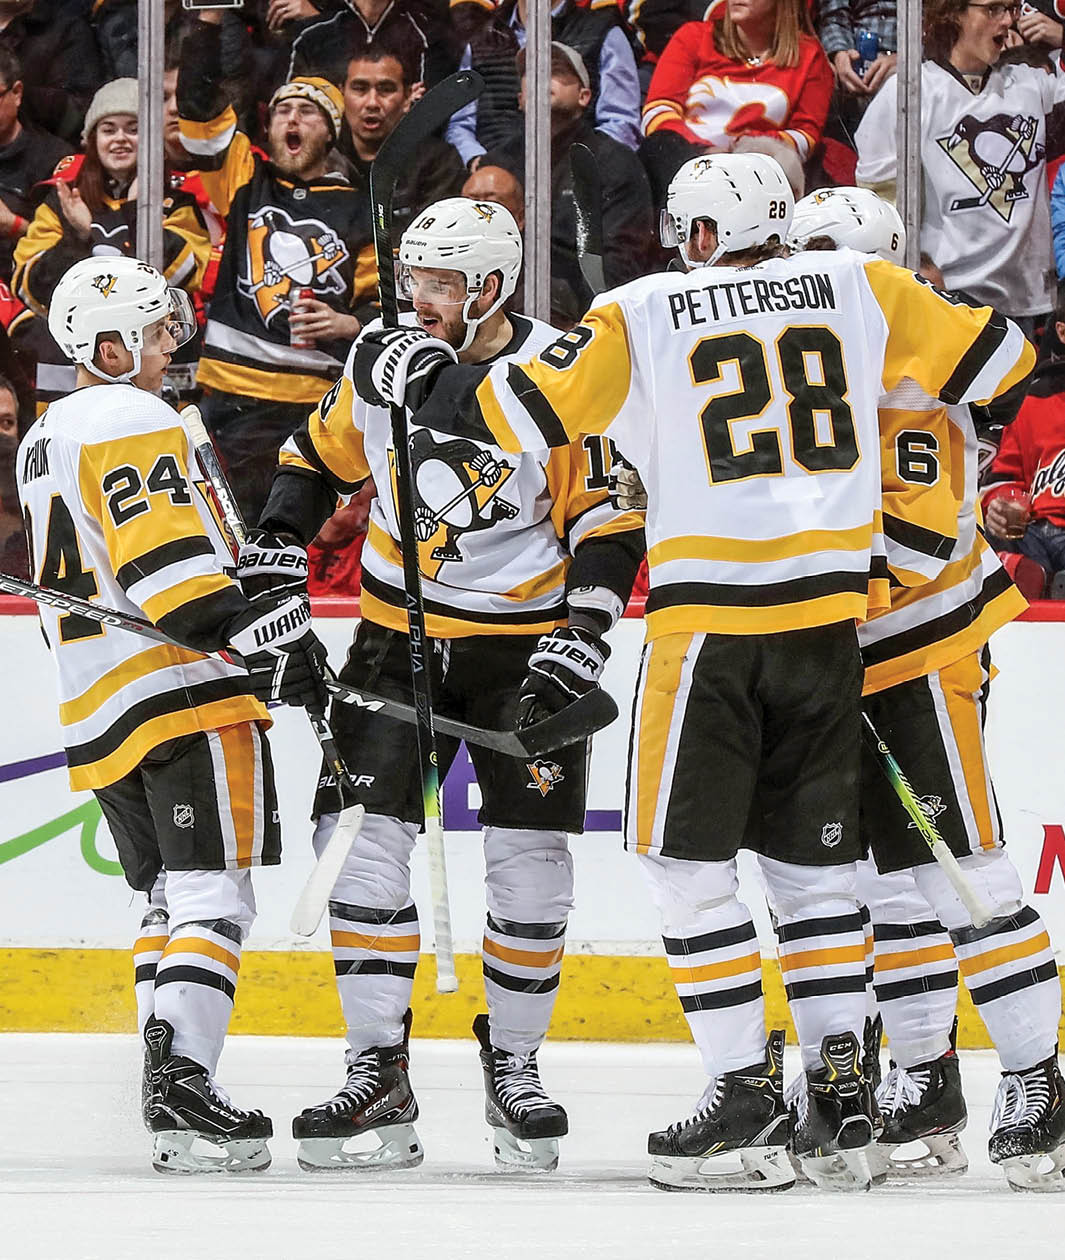 CALGARY, AB - DECEMBER 17: Alex Galchenyuk #18, Dominik Kahun #24, Marcus Pettersson #28 and John Marino #6 of the Pittsburgh Penguins celebrate a goal against the Calgary Flames on December 17, 2019 at the Scotiabank Saddledome in Calgary, Alberta, Canada  (Photo by Gerry Thomas NHLI via Getty Images)